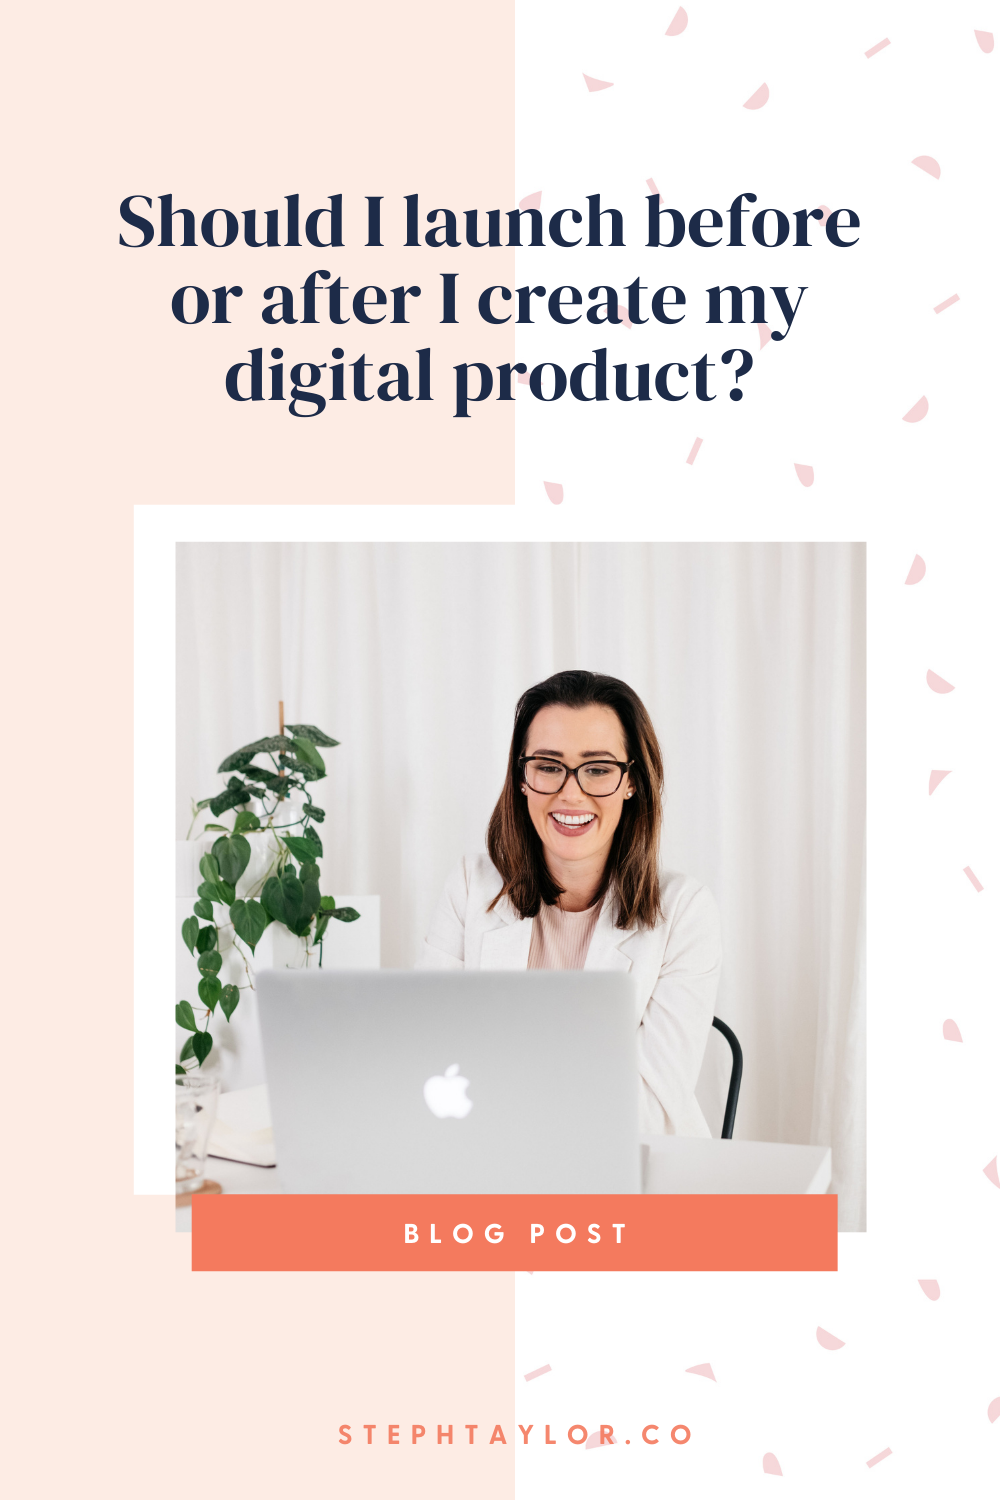 Should I launch before or after I create my digital product?